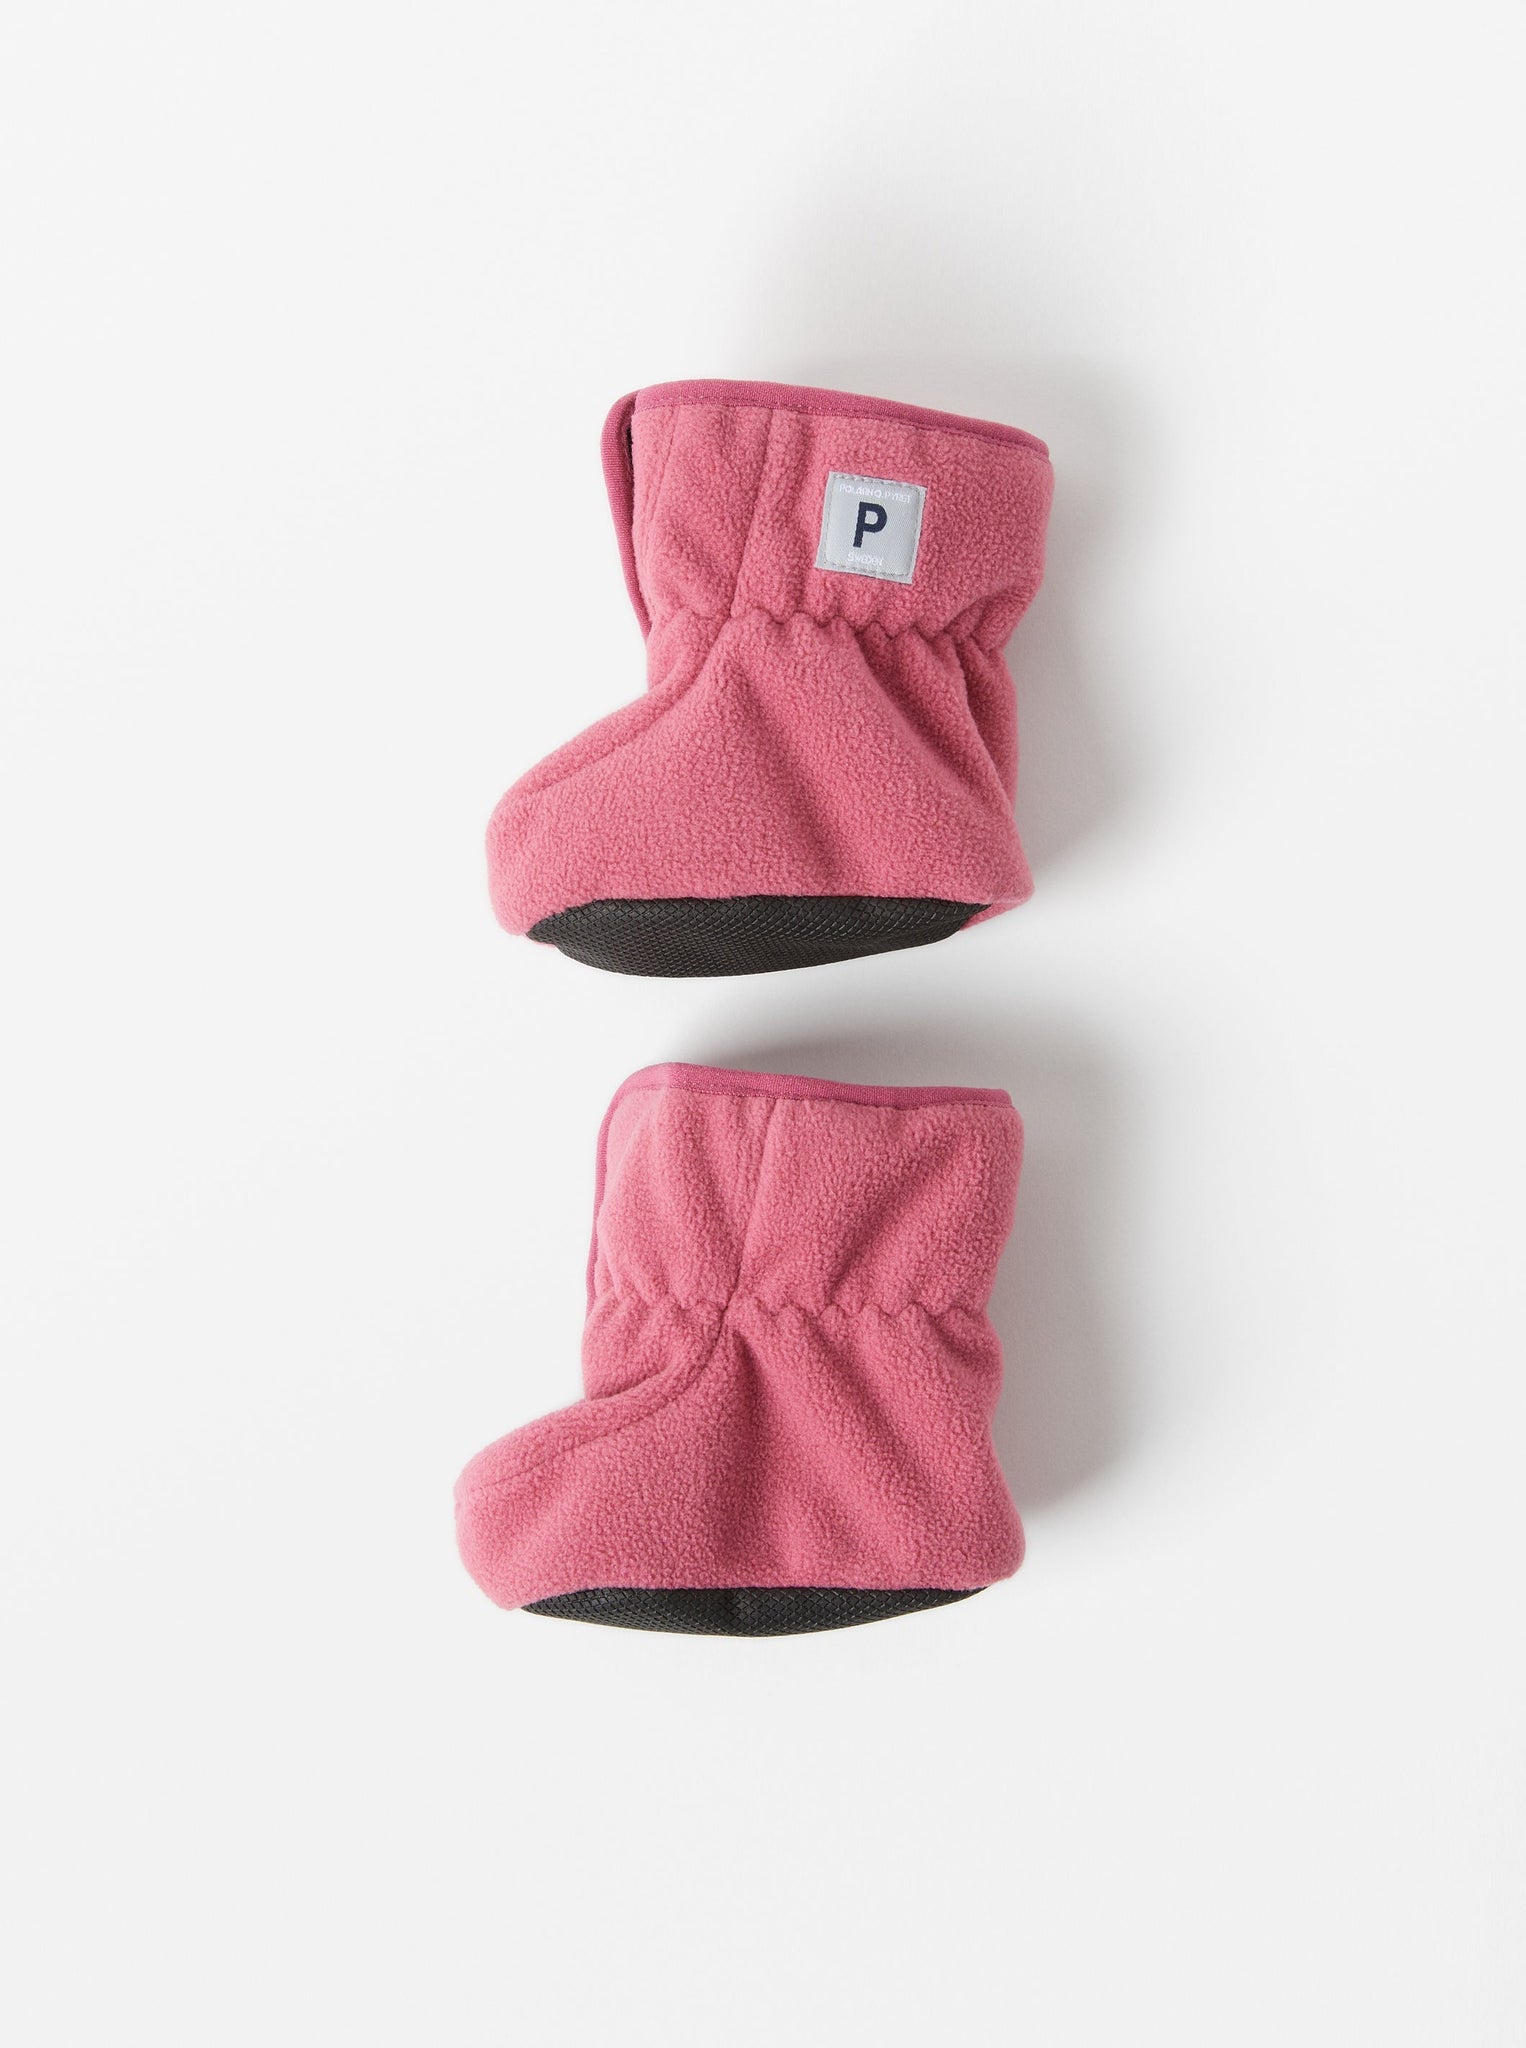 Pink Fleece Baby Booties from the Polarn O. Pyret kidswear collection. Ethically produced kids outerwear.